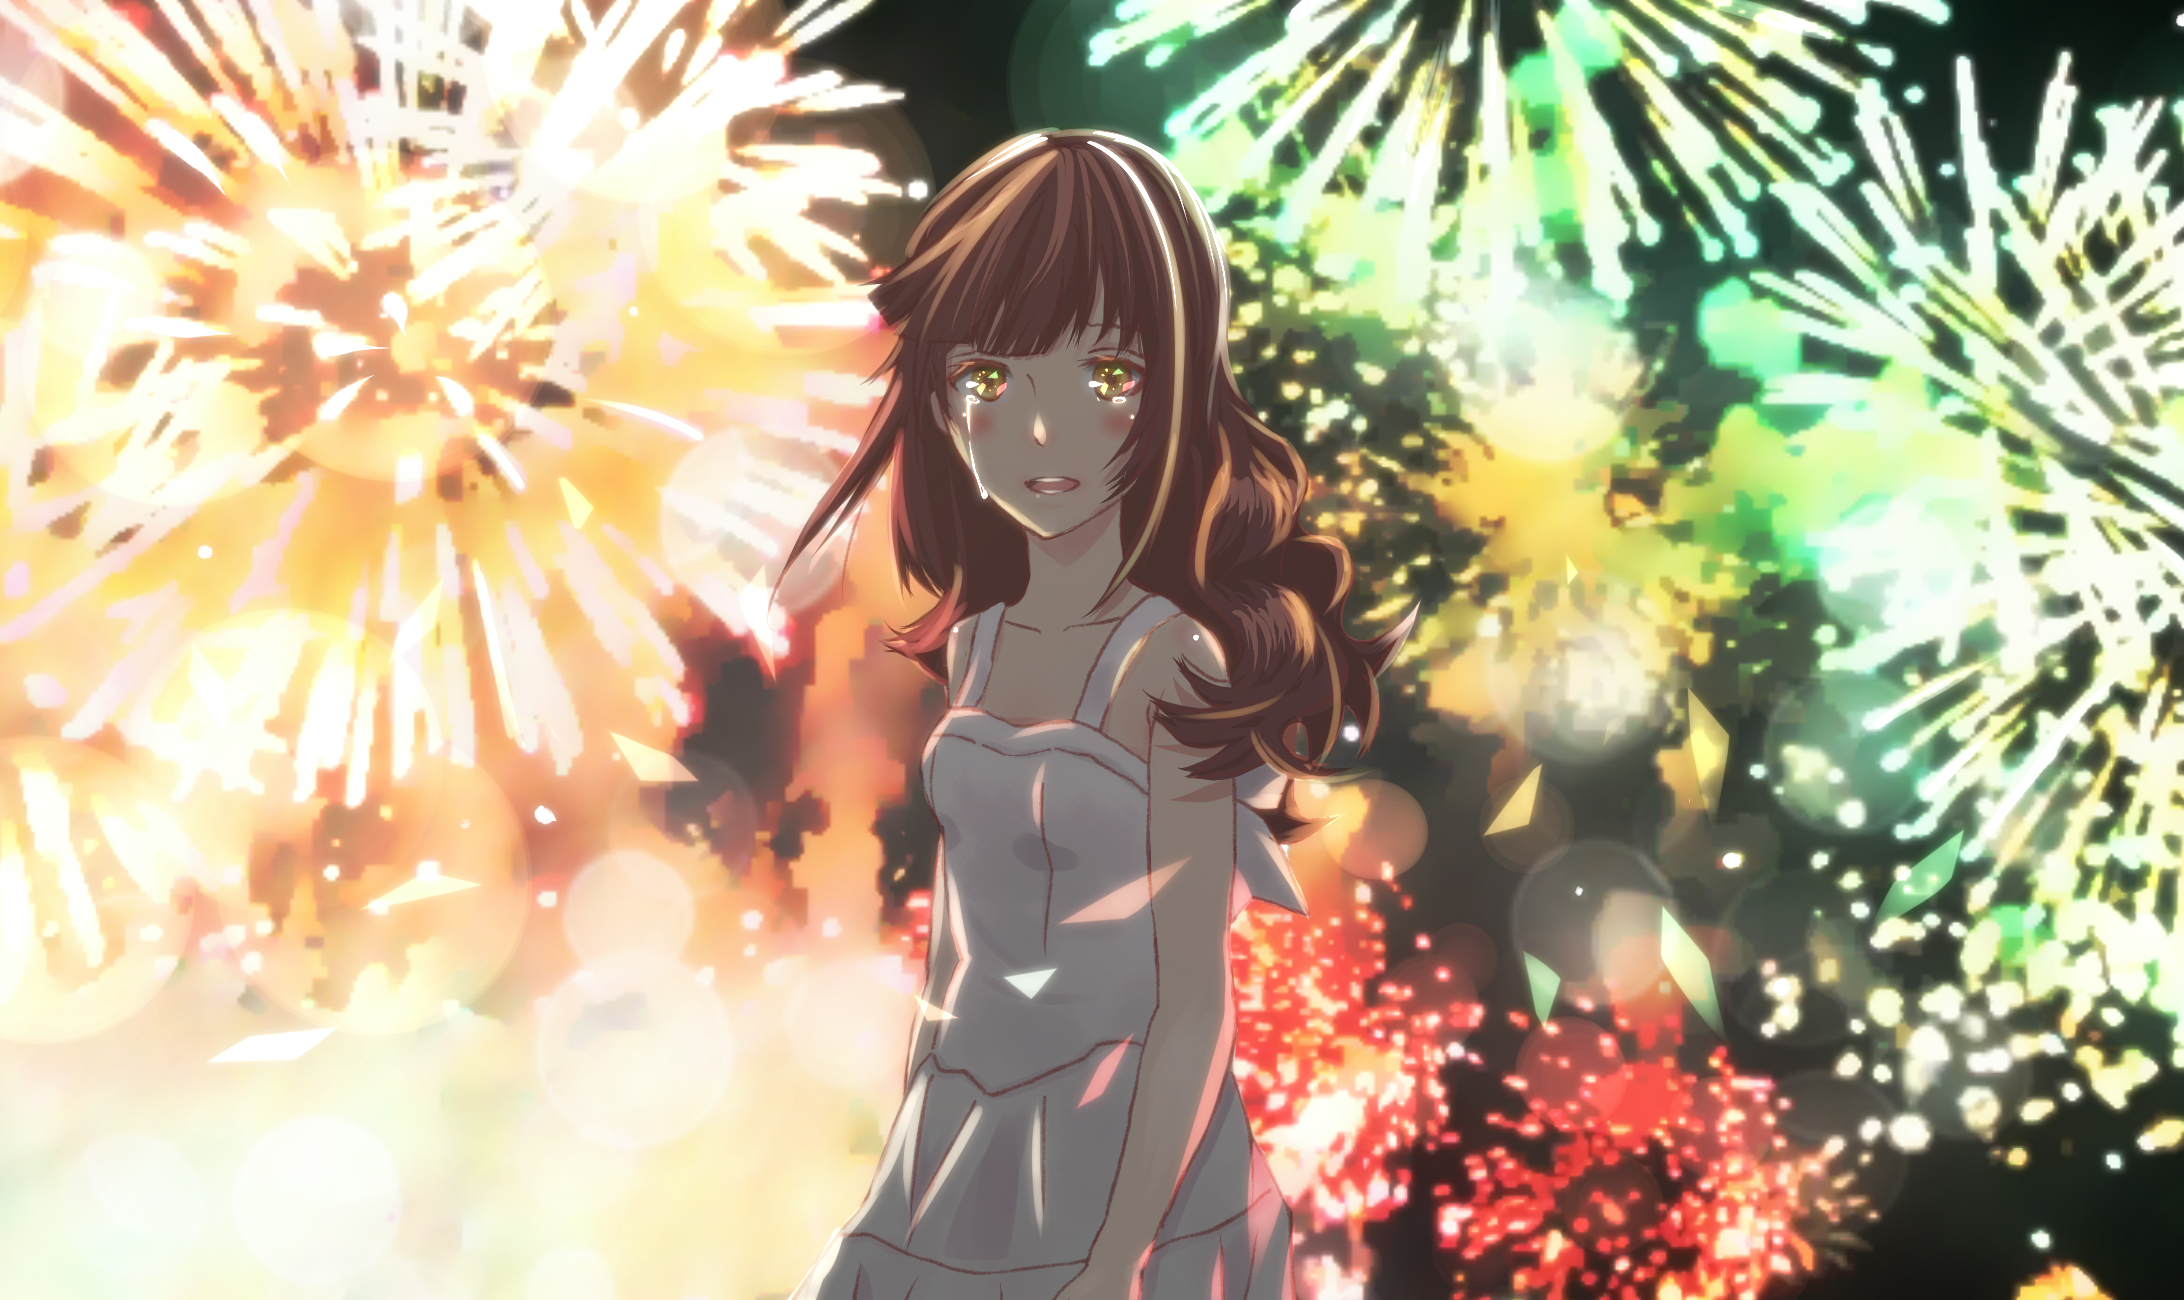 Fireworks by しまみやこ